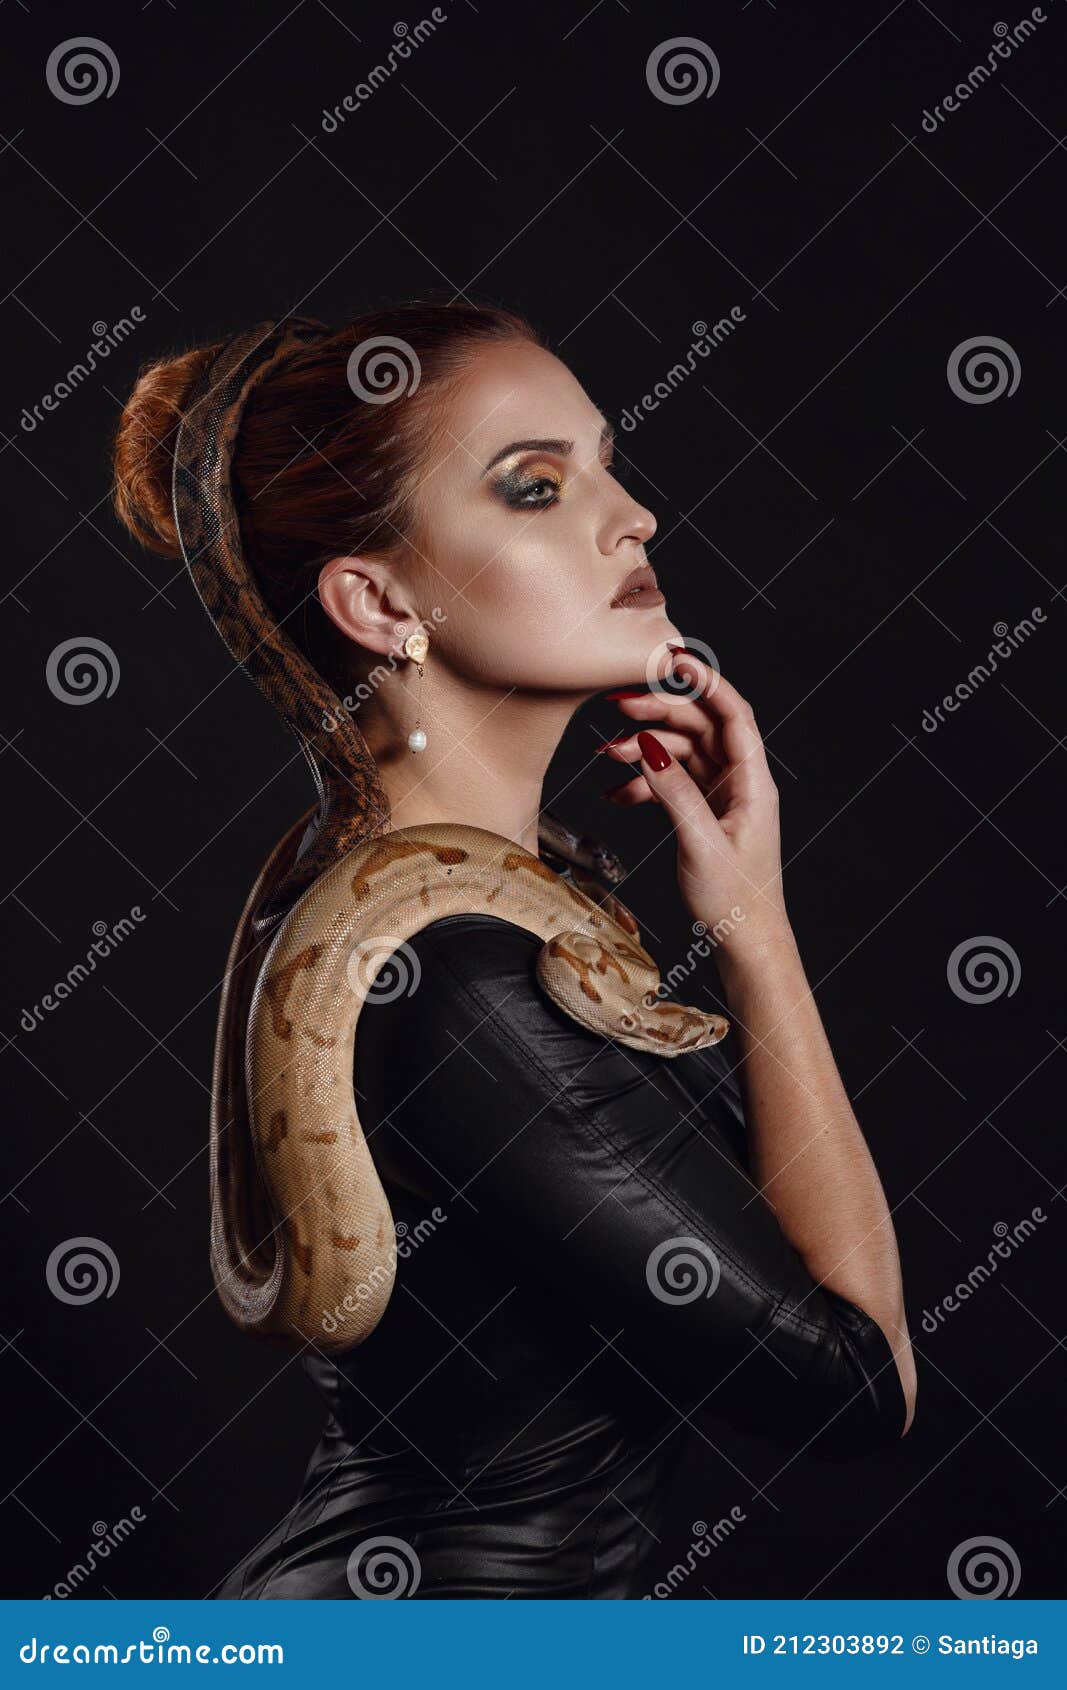 chance bishop add sexy girl with snake photo